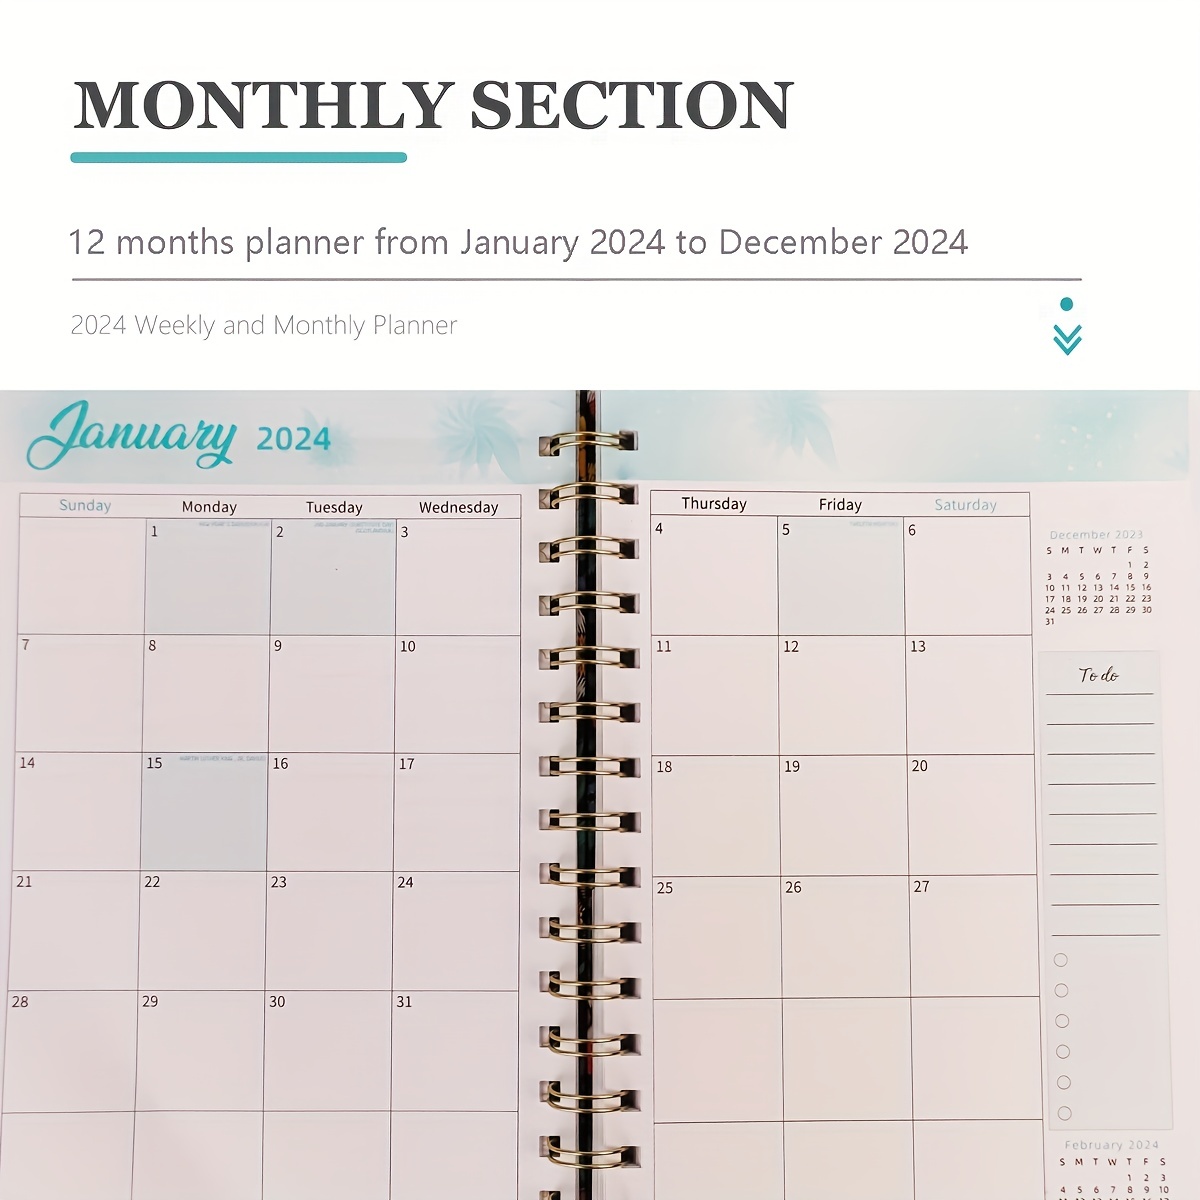 Daily Weekly & Monthly Planner 2024: From January to December - 12